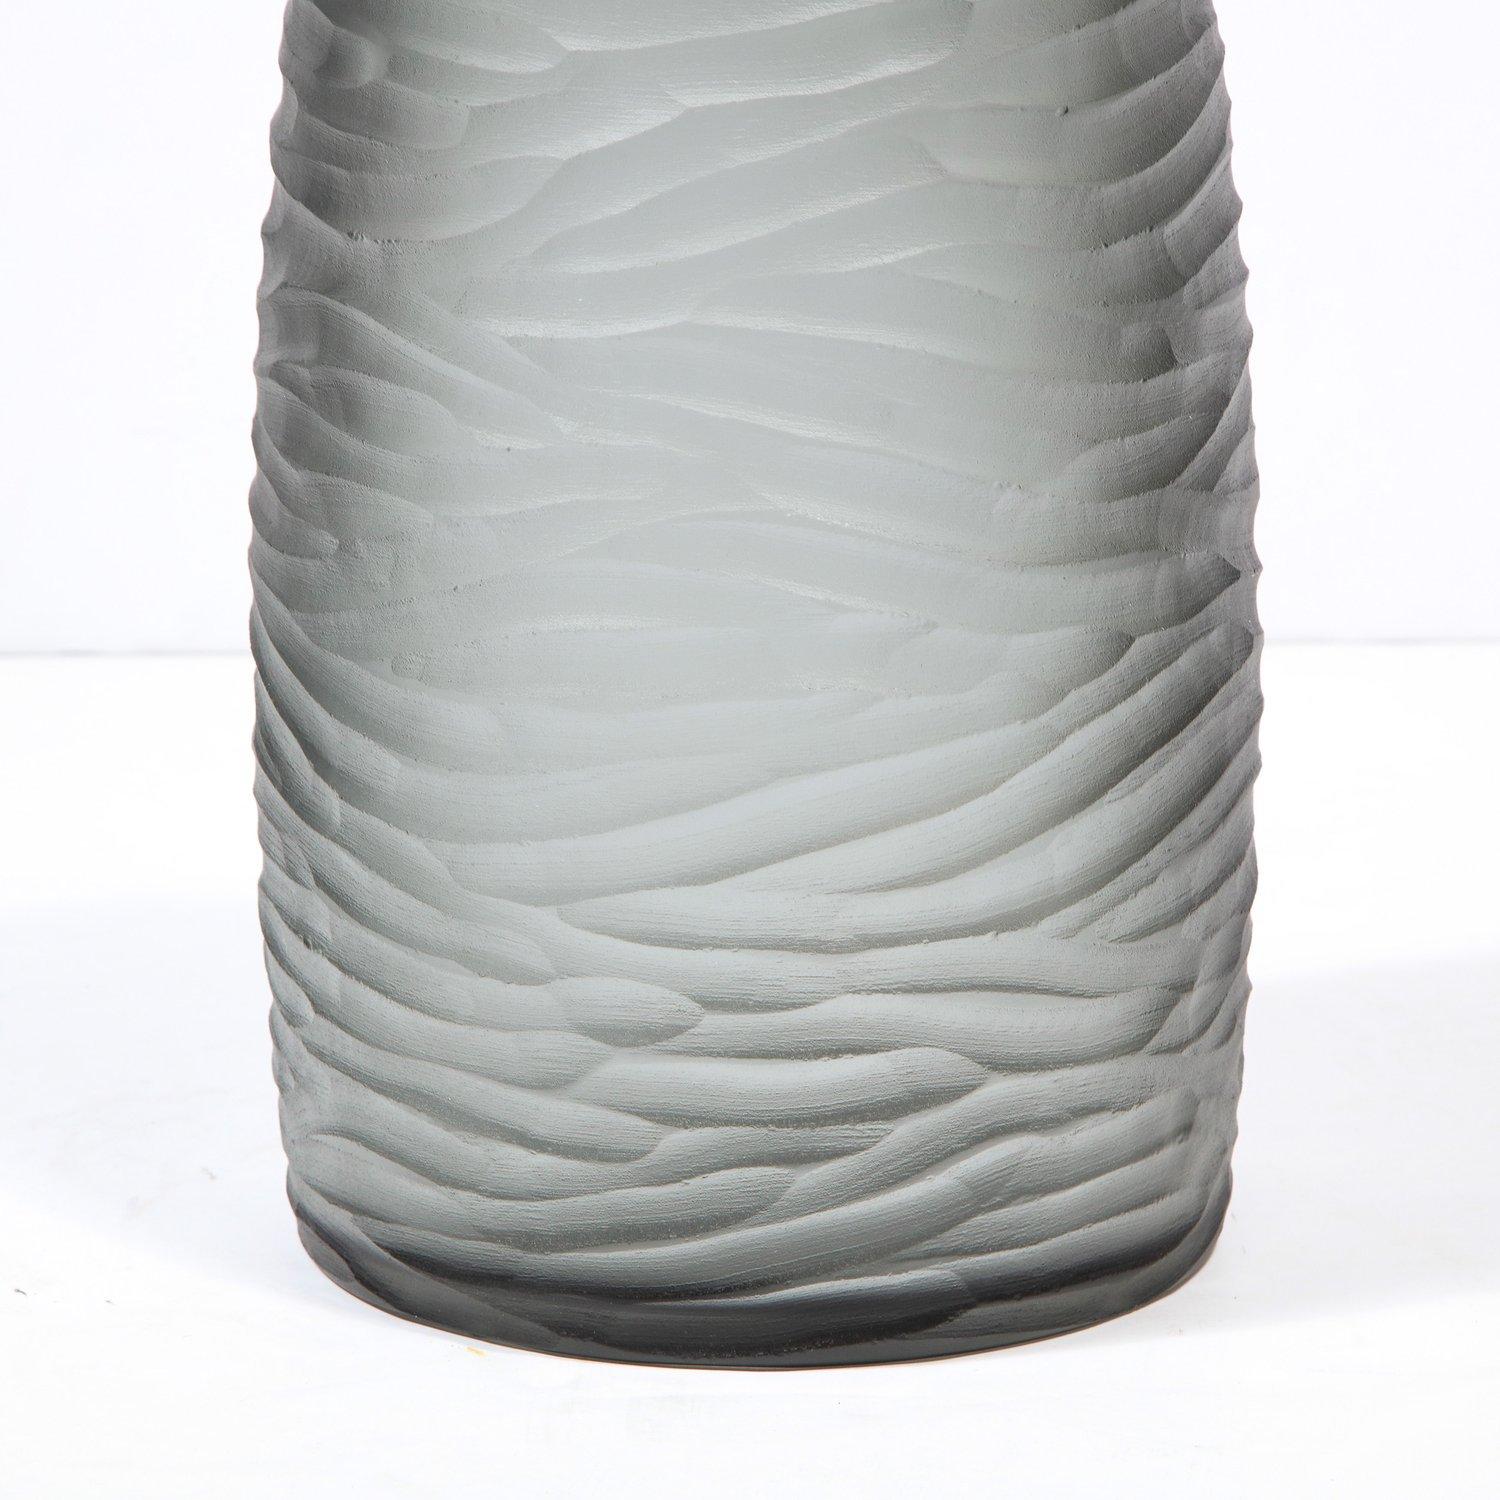 This stunning modernist large vase was handblown in Murano, Italy- the island off the coast of Venice renowned for centuries for its superlative glass production. It features a cylindrical body that tapers subtly at each end in frosted graphite